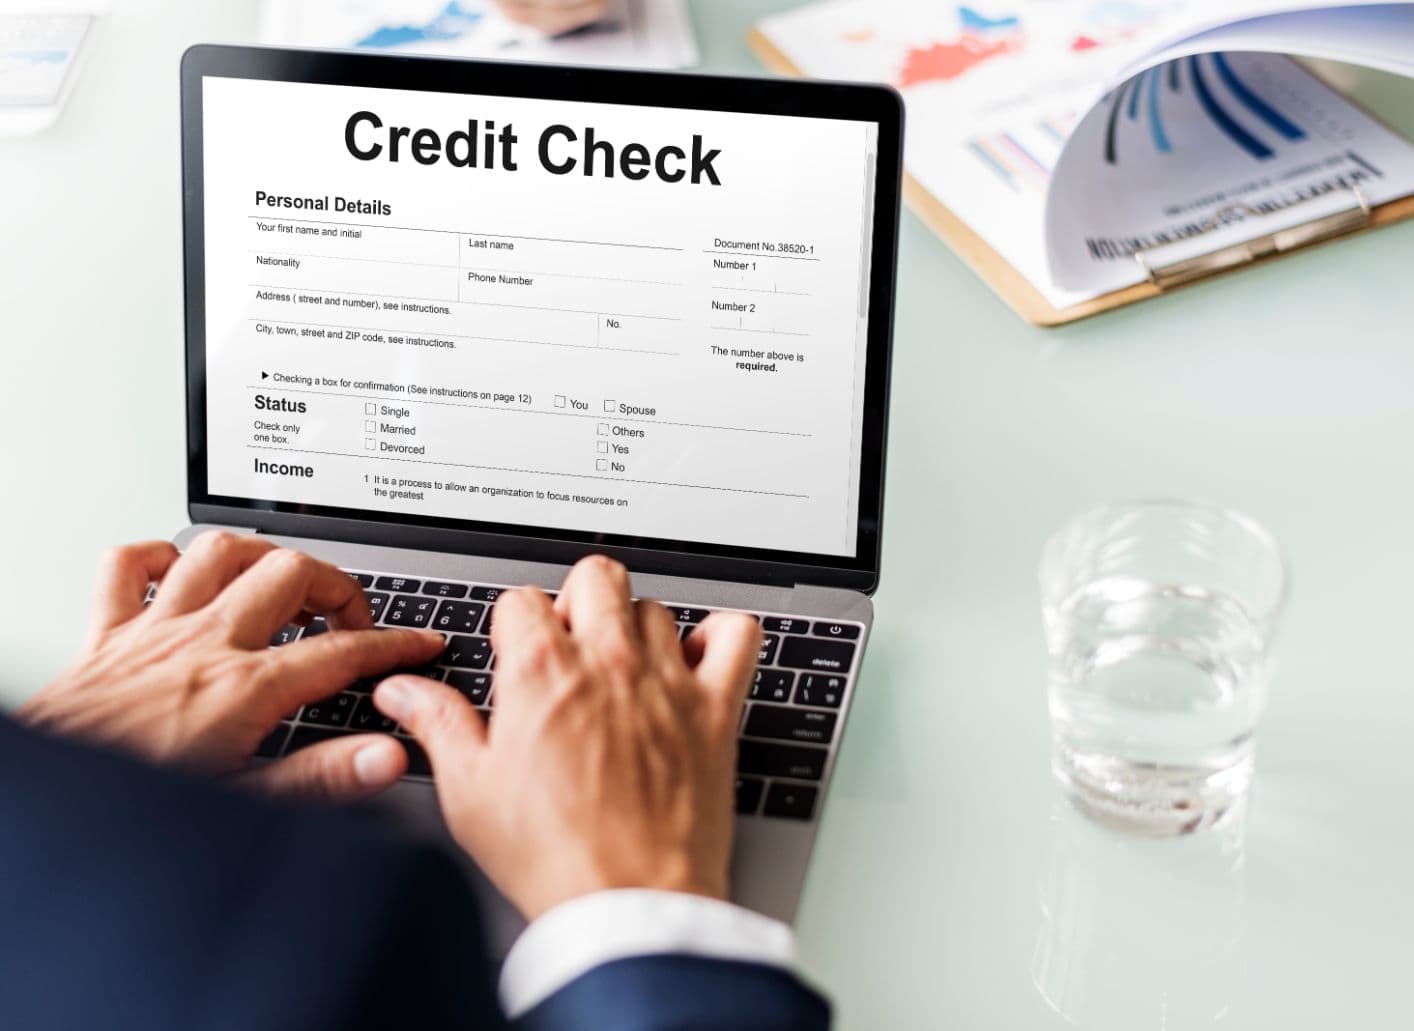 How to get an EXCELLENT credit score